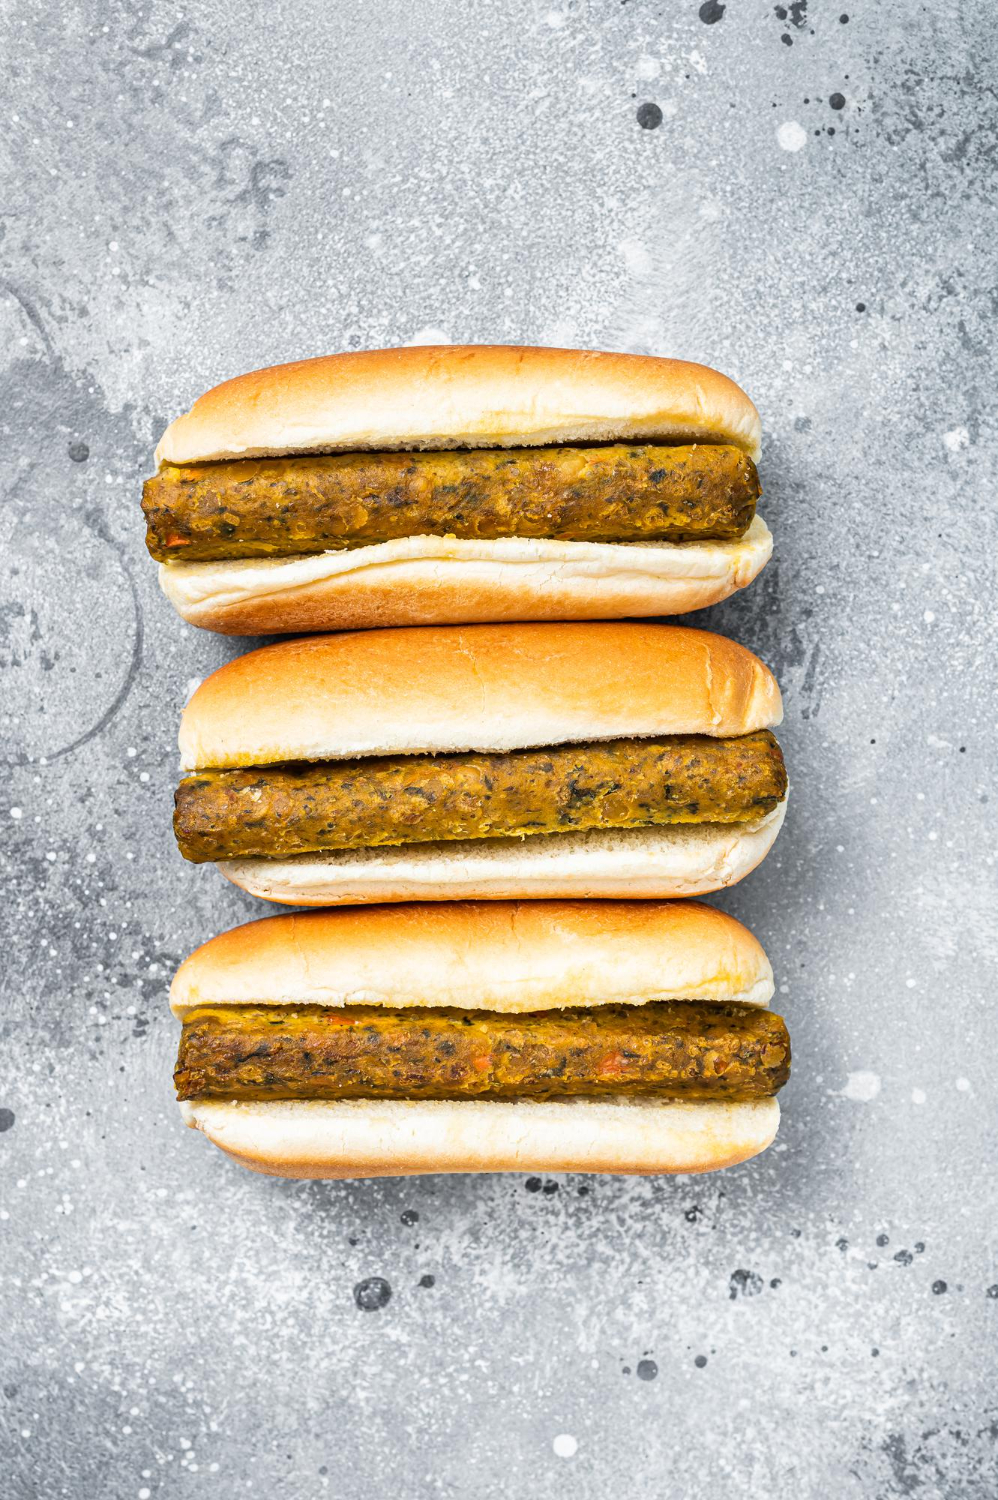 vegan hot dog with meatless vegetarian sausage gray background top view